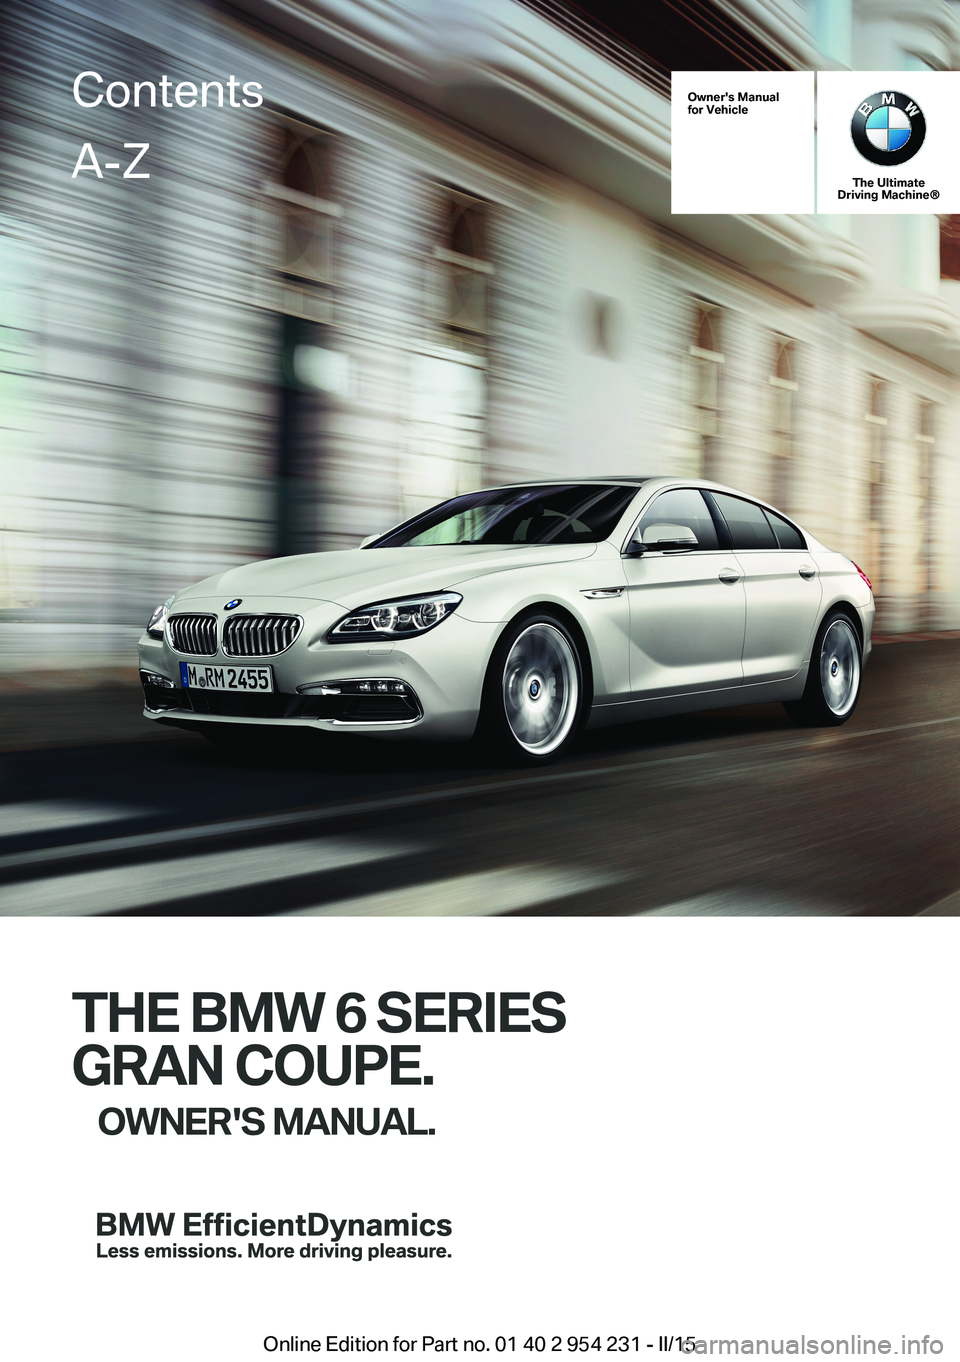 BMW 640I GRAN COUPE 2015  Owners Manual Owner's Manualfor Vehicle
The UltimateDriving Machine®
THE BMW 6 SERIES
GRAN COUPE.
OWNER'S MANUAL.
ContentsA-Z
Online Edition for Part no. 01 40 2 954 231 - II/15   